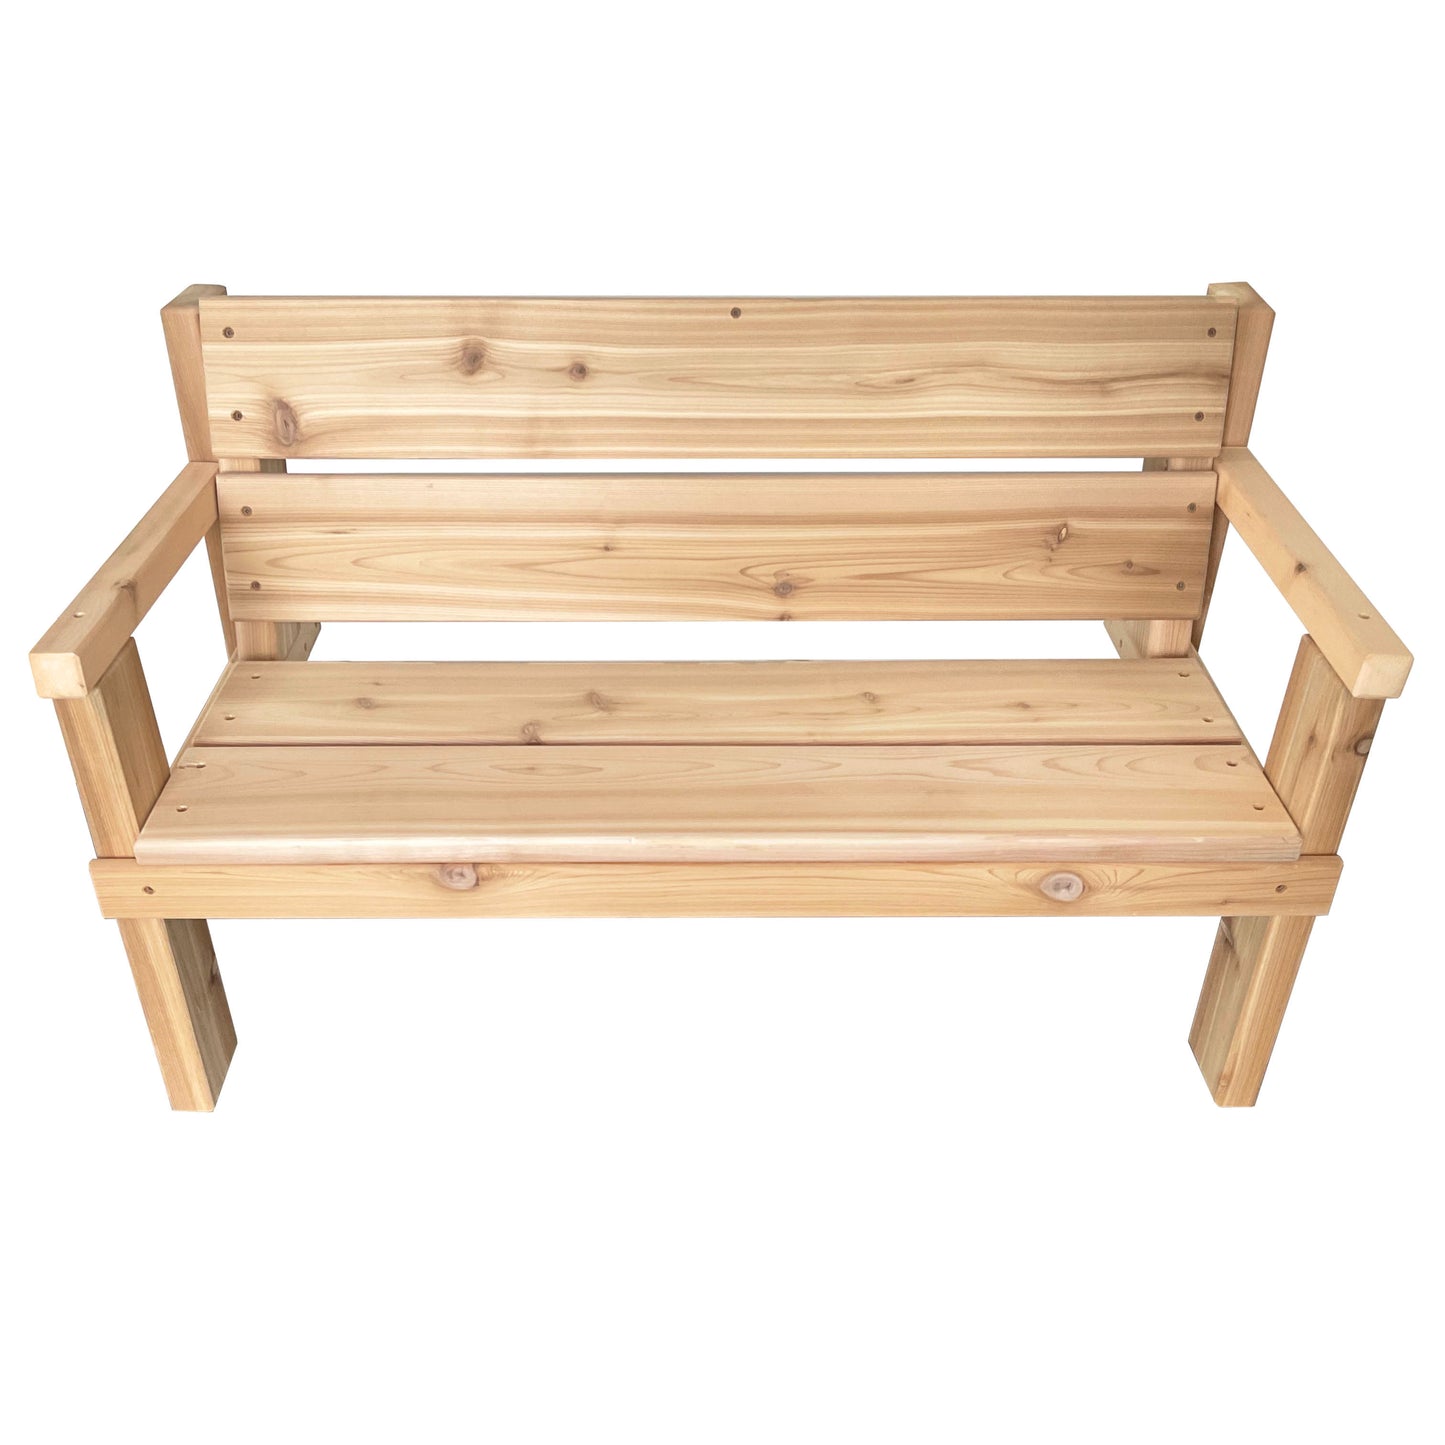 Cedar Bench - Just Playing (Made in Canada)